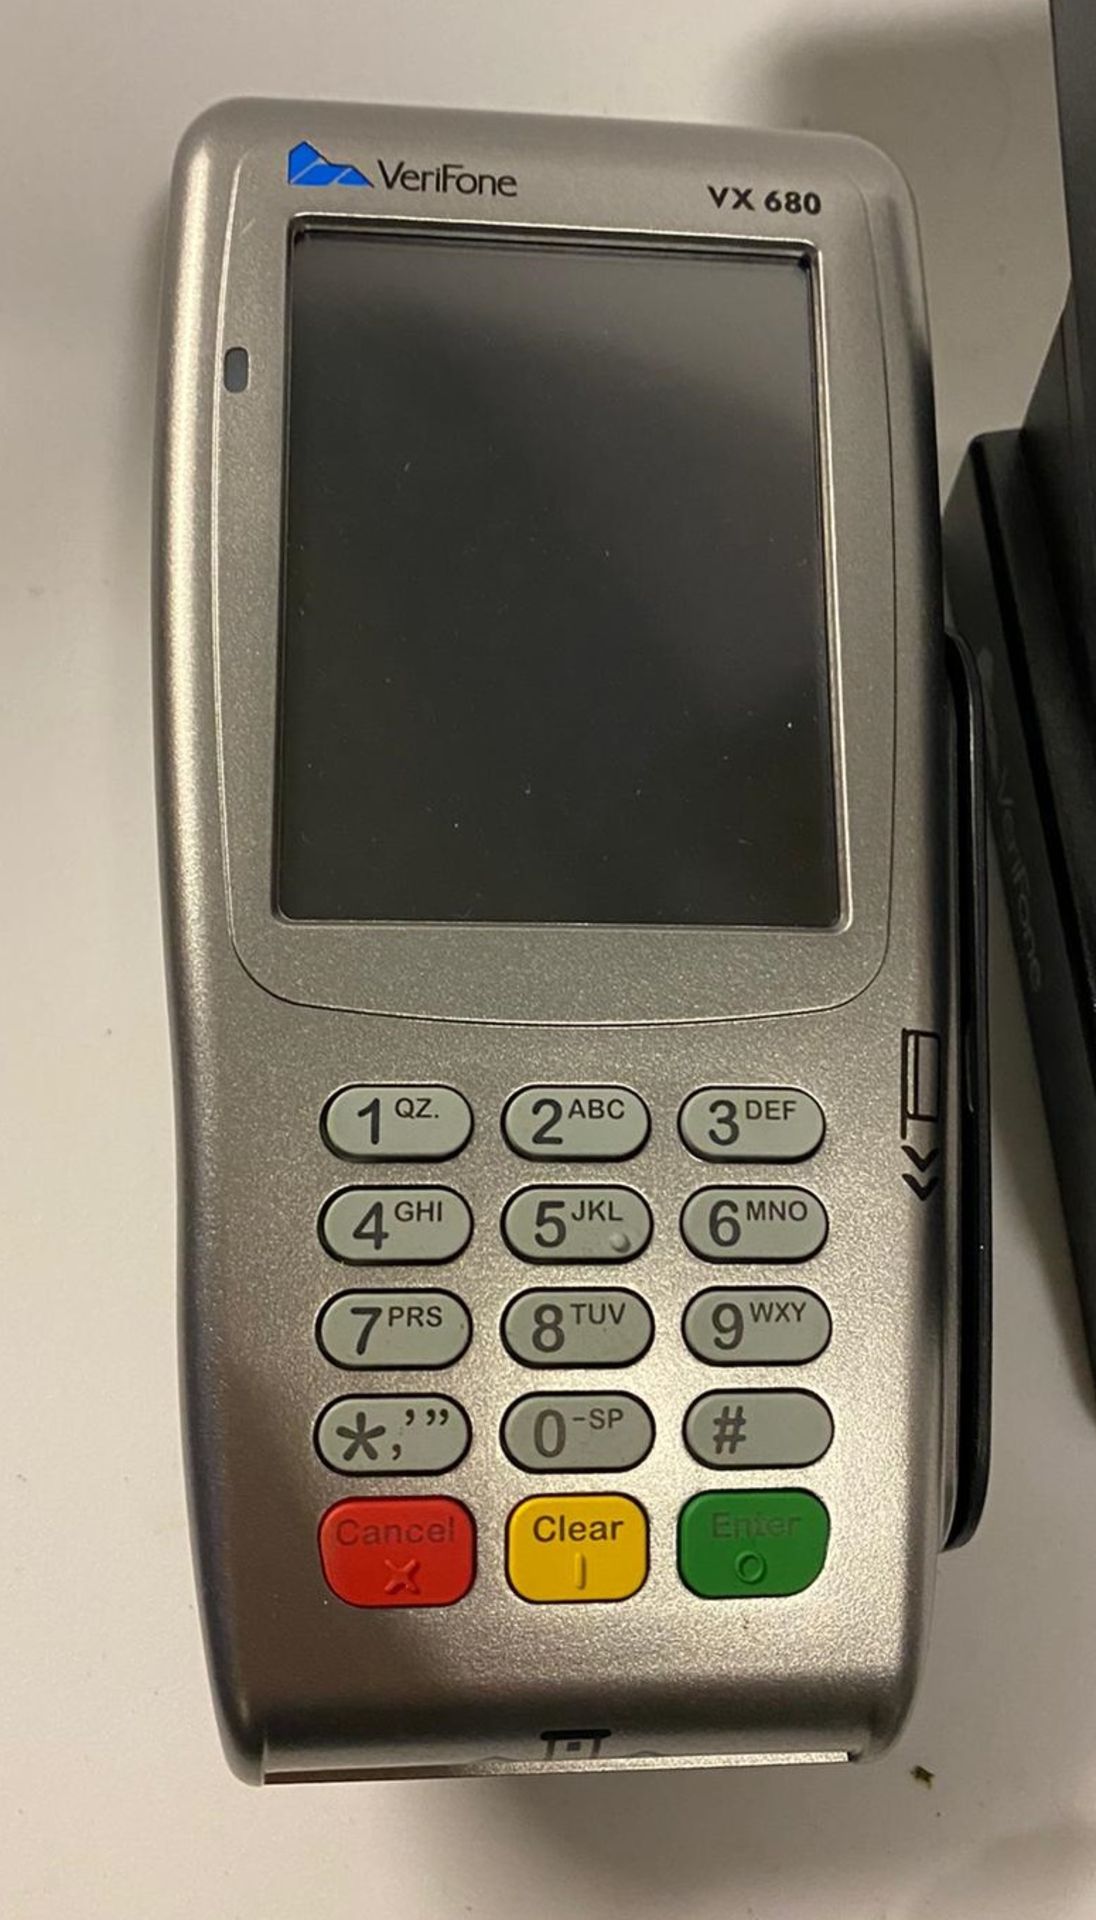 1 x Verifone VX 6803G EMV Smart/Chip Card & COntactless - New and Boxed - Location: Altrincham WA14 - Image 2 of 5